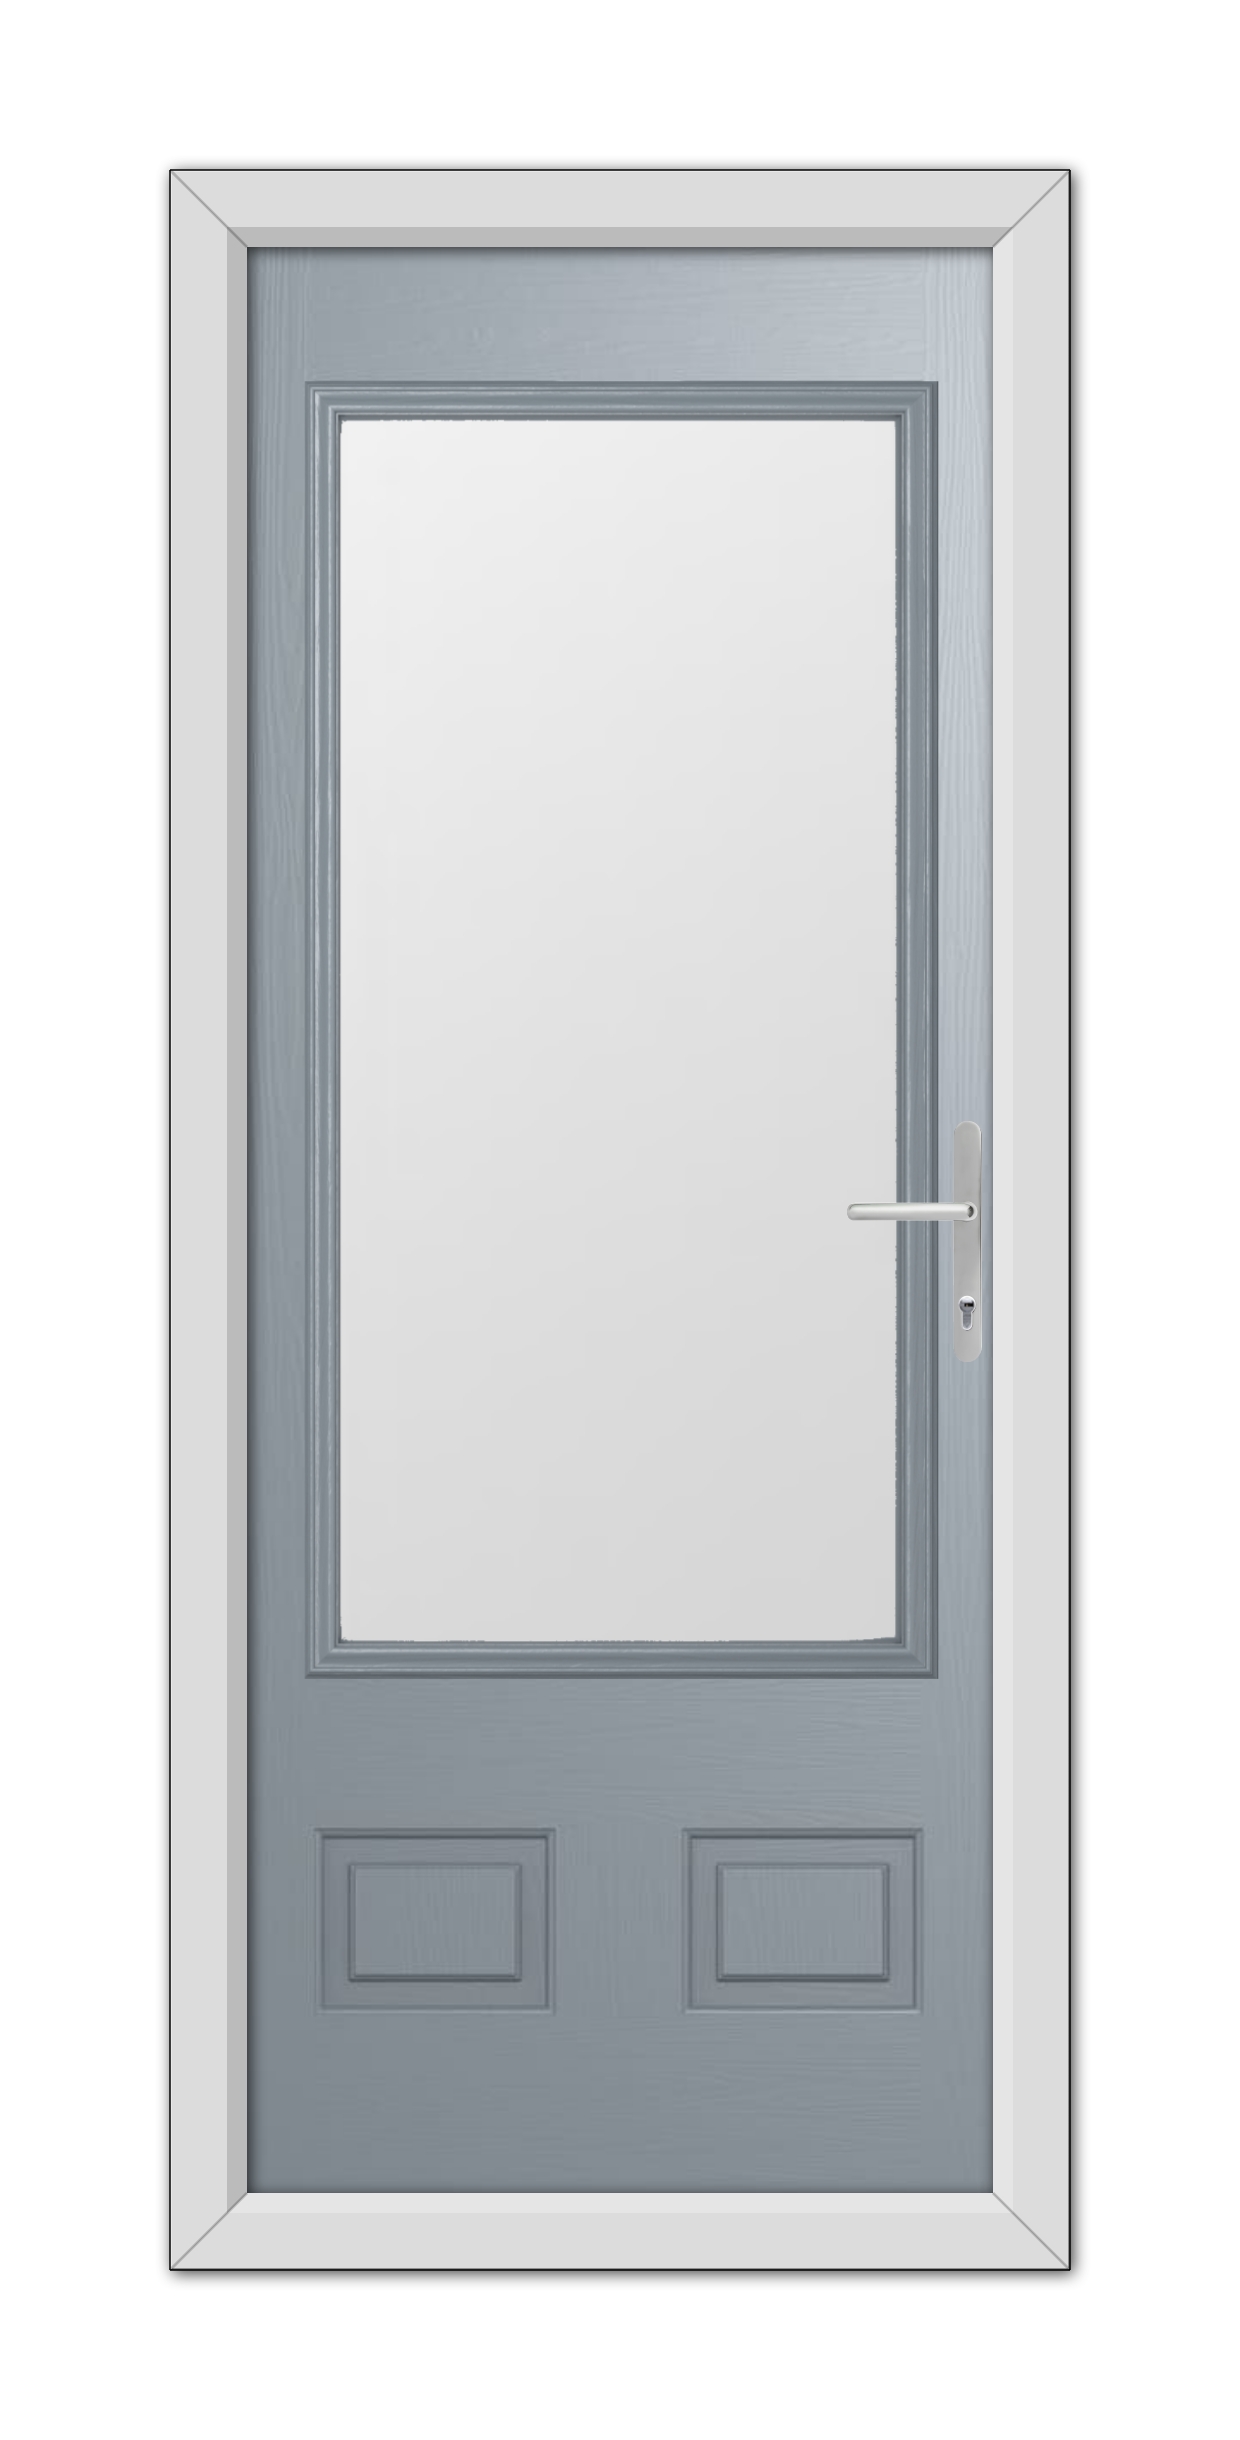 A French Grey Walcot Composite Door 48mm Timber Core with a silver handle, featuring a large central panel and two smaller bottom panels, set in a white frame.